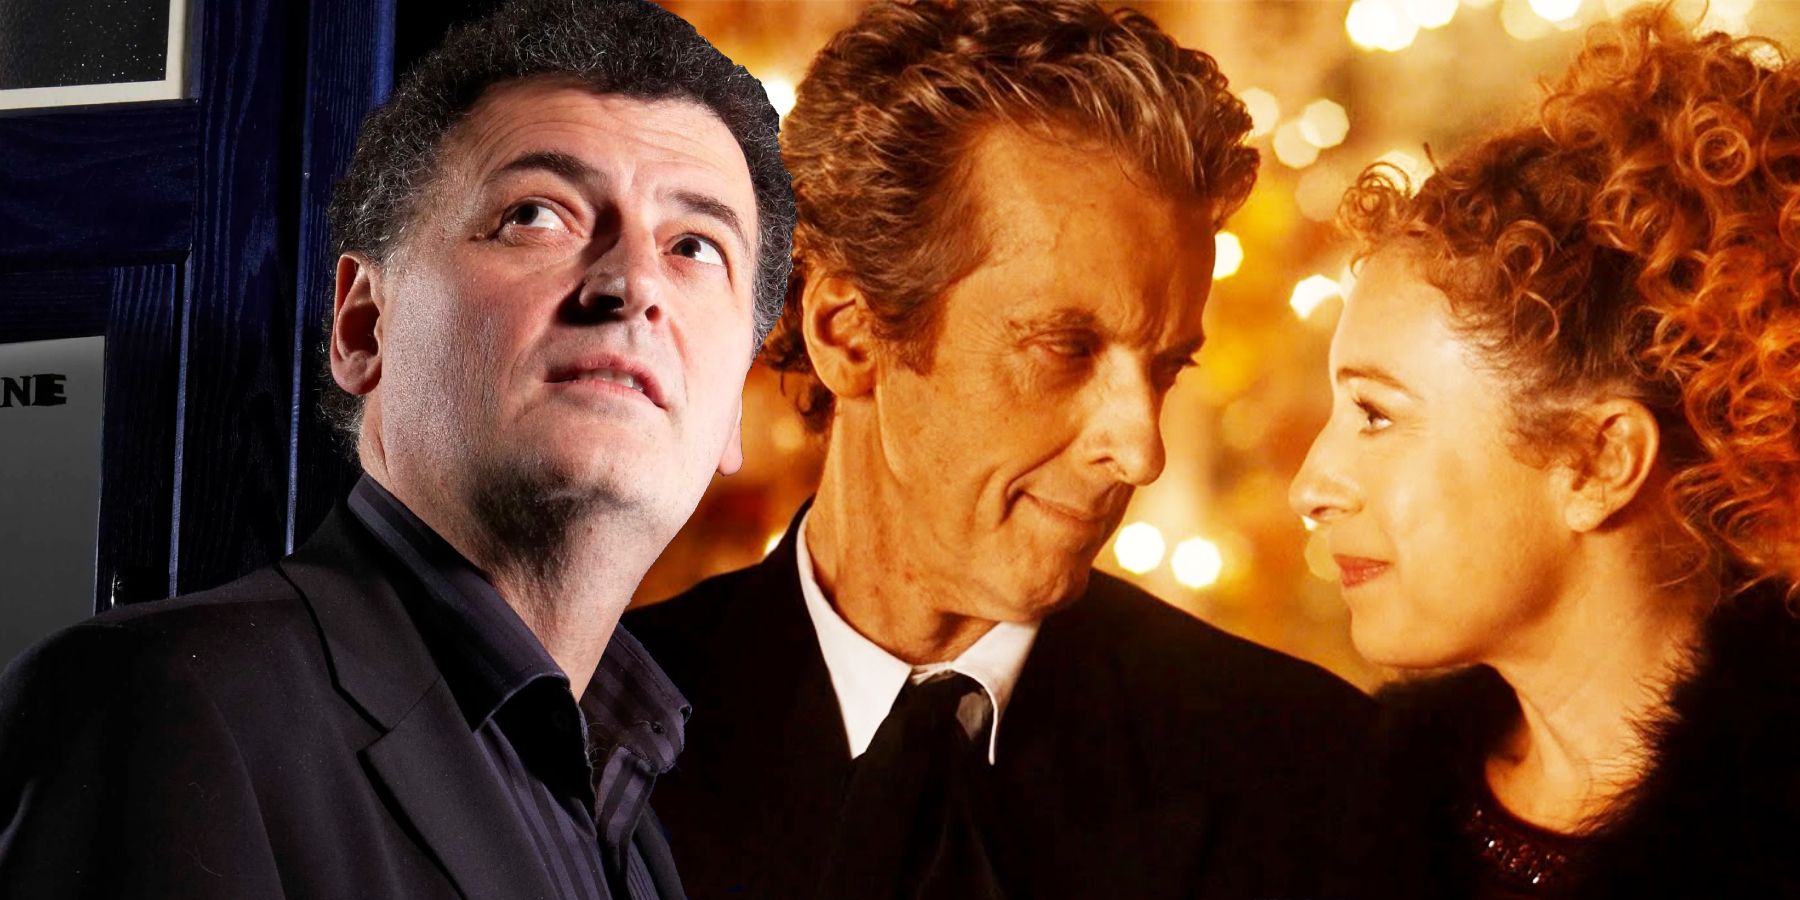 Steven Moffat's The Husbands of River Song was almost his last Doctor Who